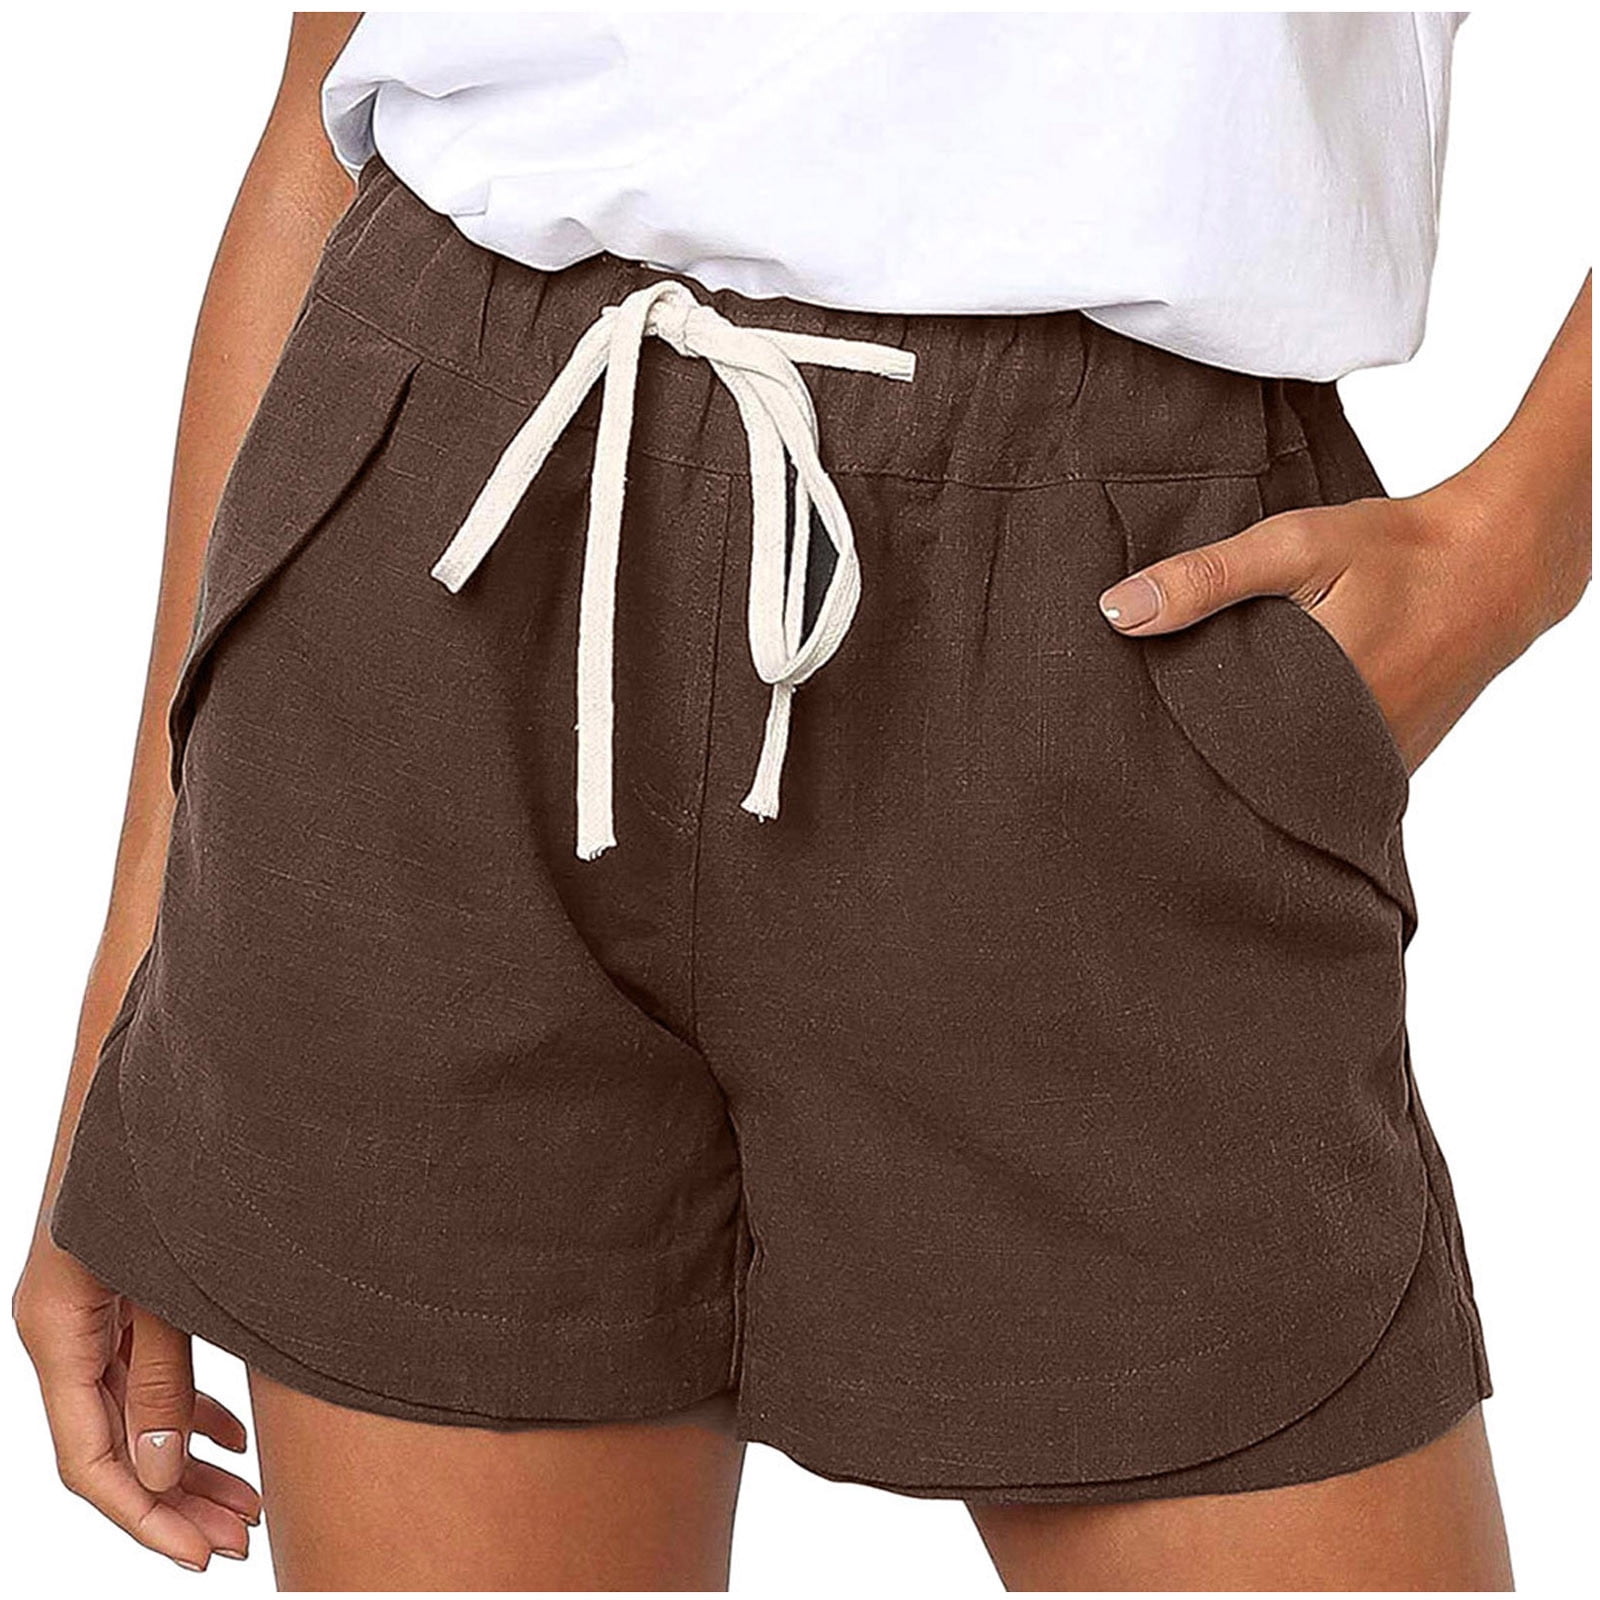 Shorts Plus Size Casual Solid Color Comfy Mid Rise Pants Women Fashion Loose Fit Workout Trendy Womens Pants Bandage Lightweight Party Vacation Beach Shorts with Pocket（Khaki,M） - Walmart.com